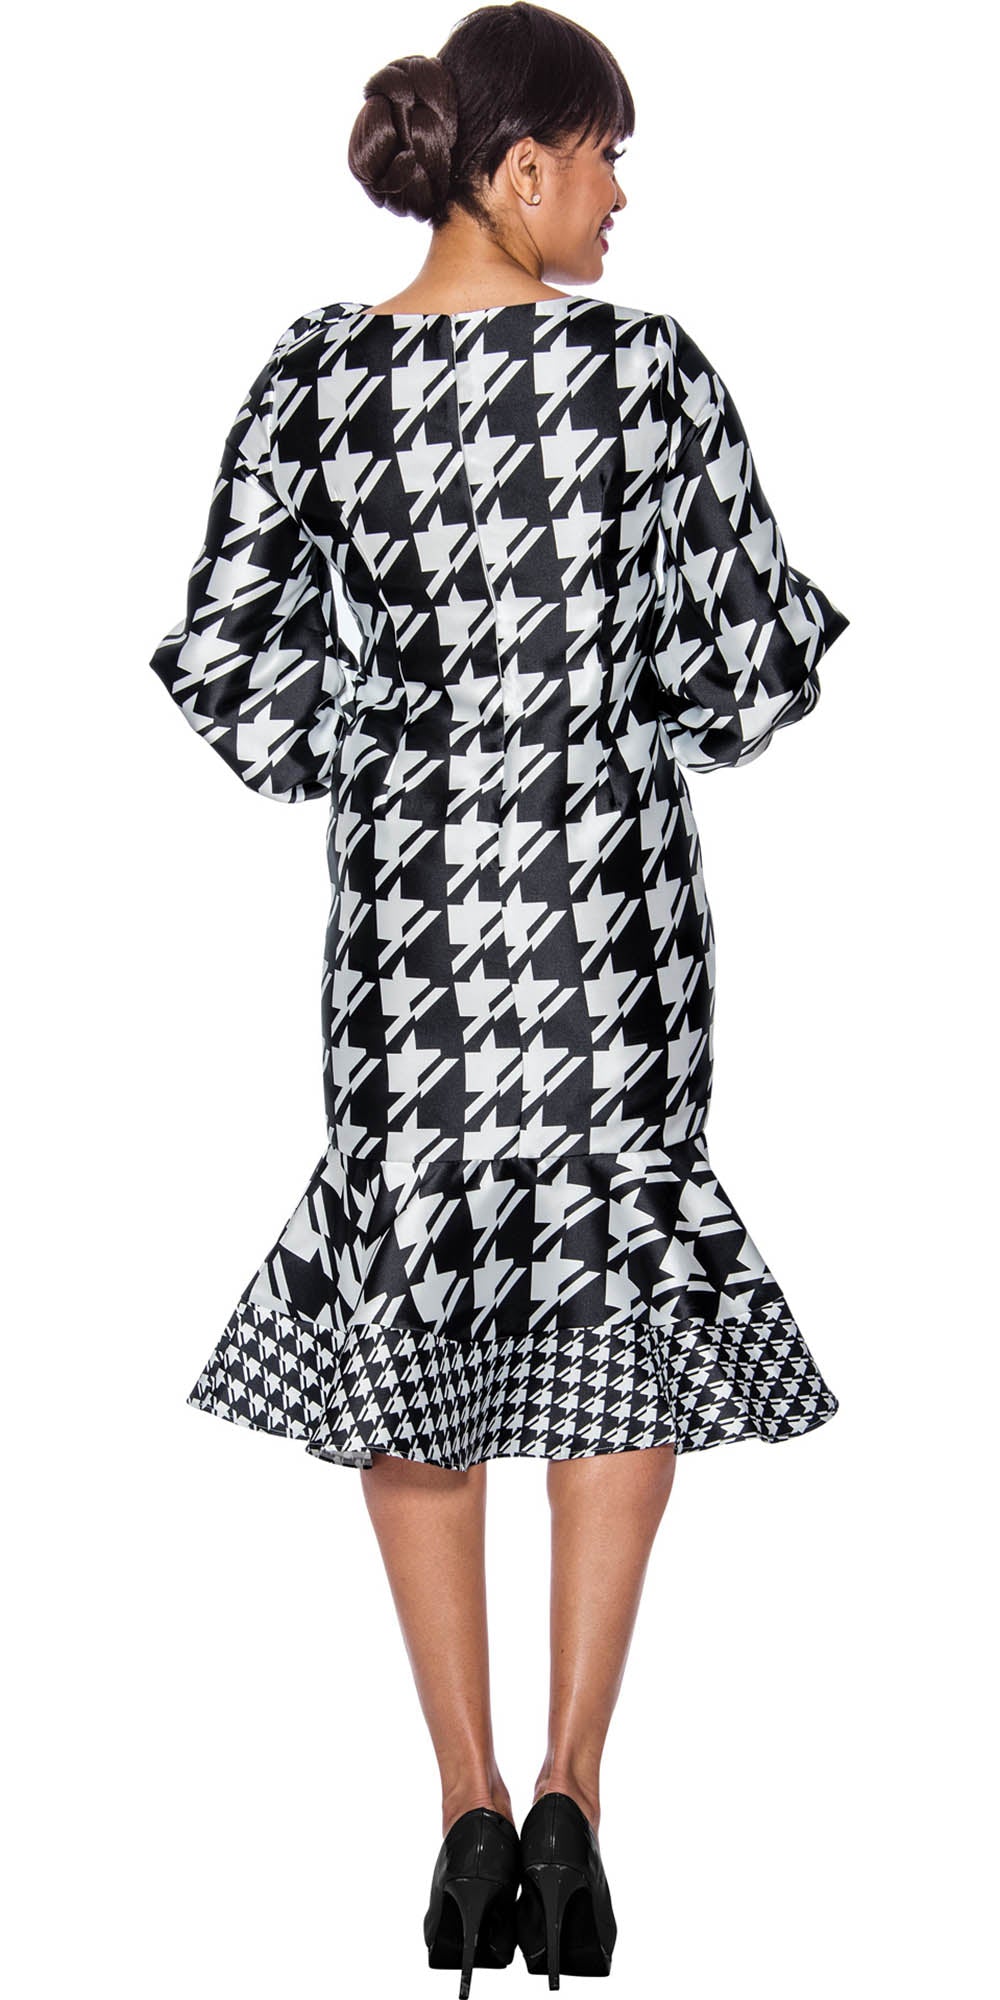 Dresses by Nubiano - 12101 - Black White - Houndstooth Twill Dress